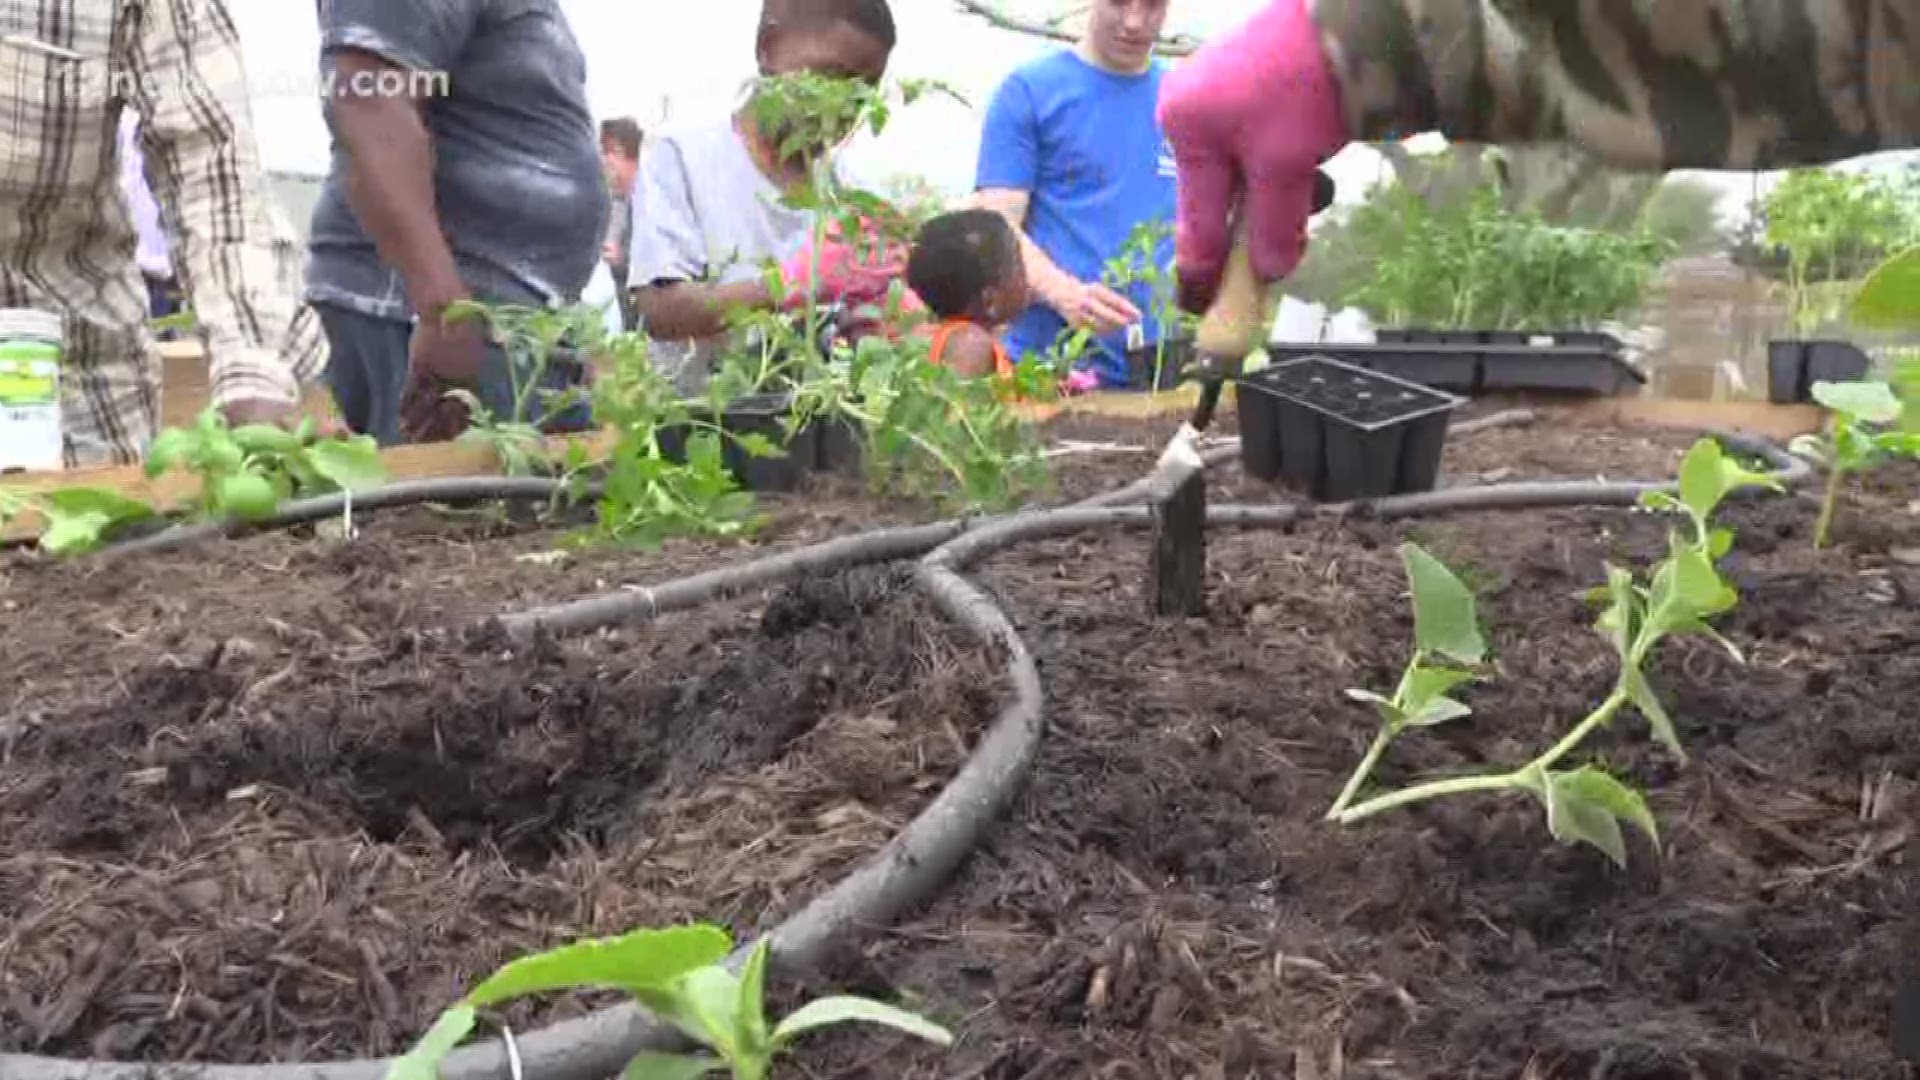 Community members can gather at the park to plant fruit and vegetables.